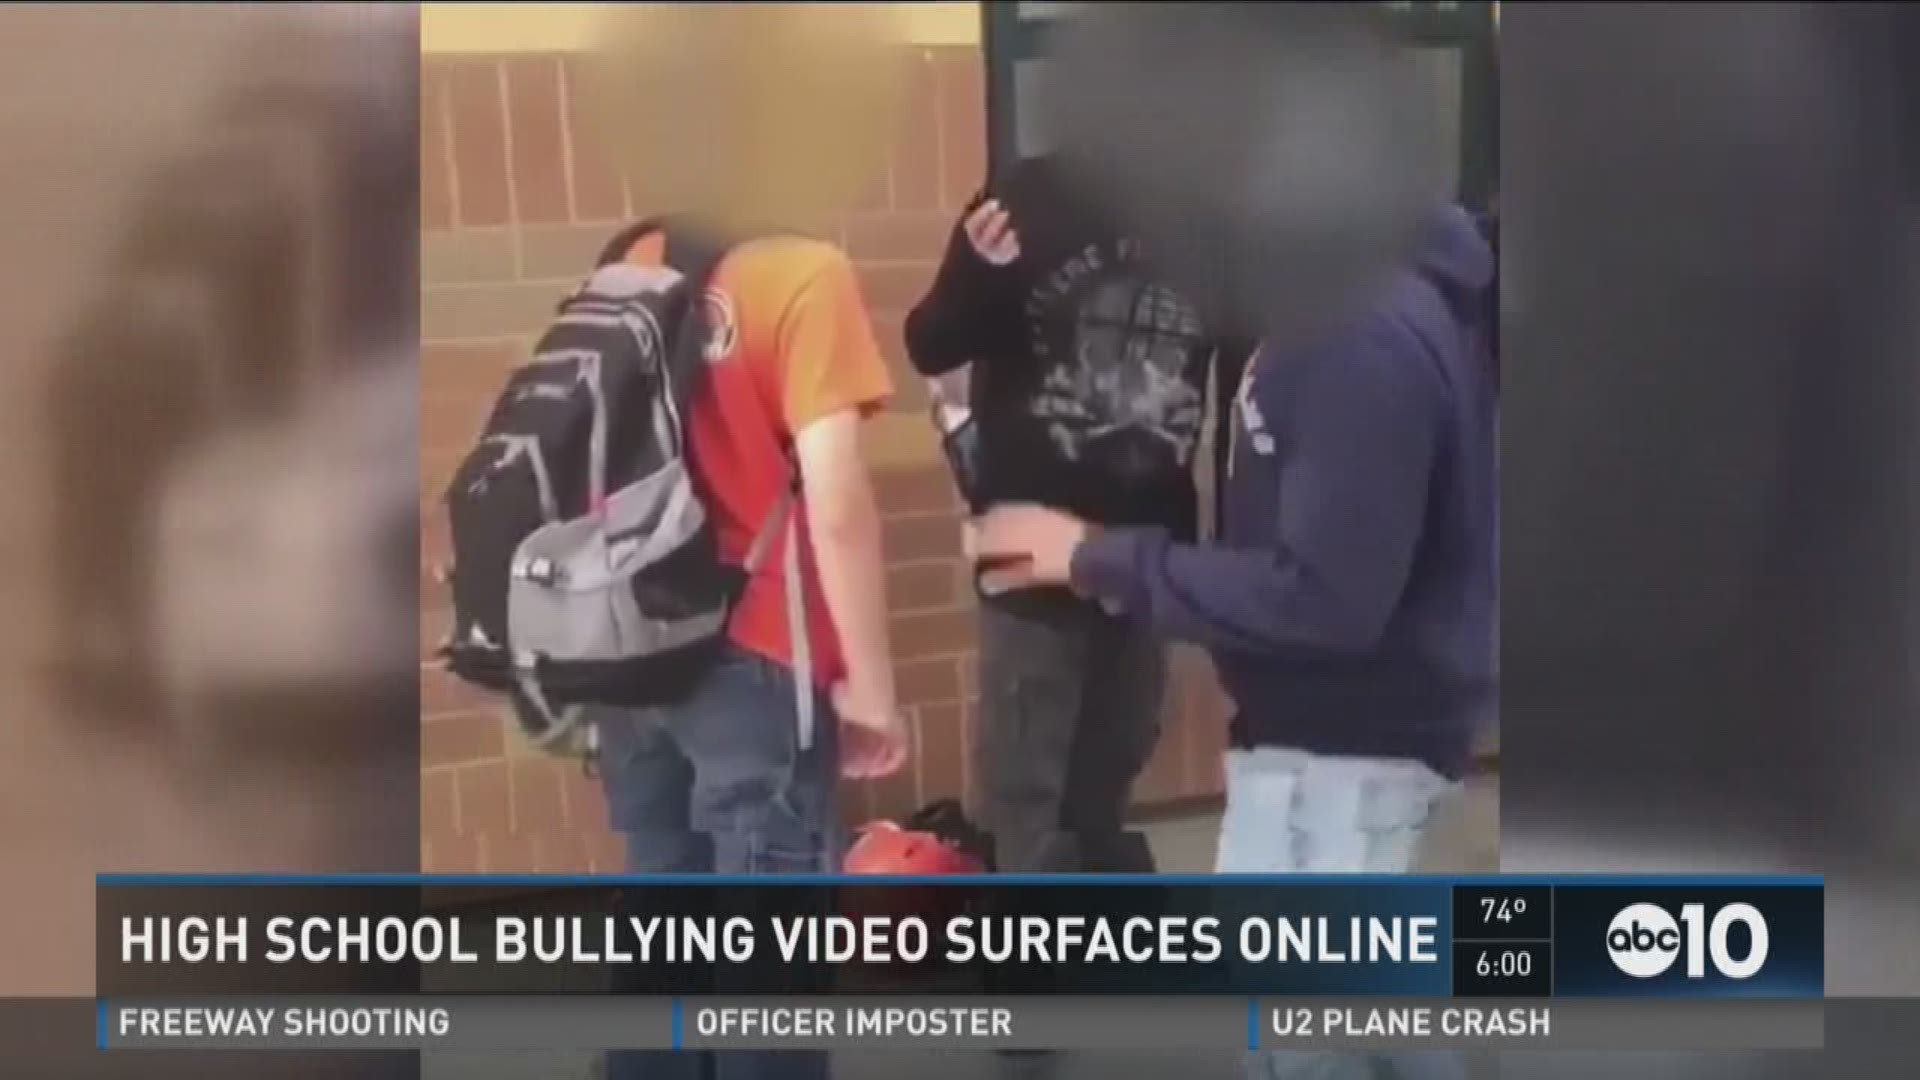 Disturbing video has surfaced on social media showing a teenager being bullied at an Elk Grove high school. (Sept. 22, 2016)